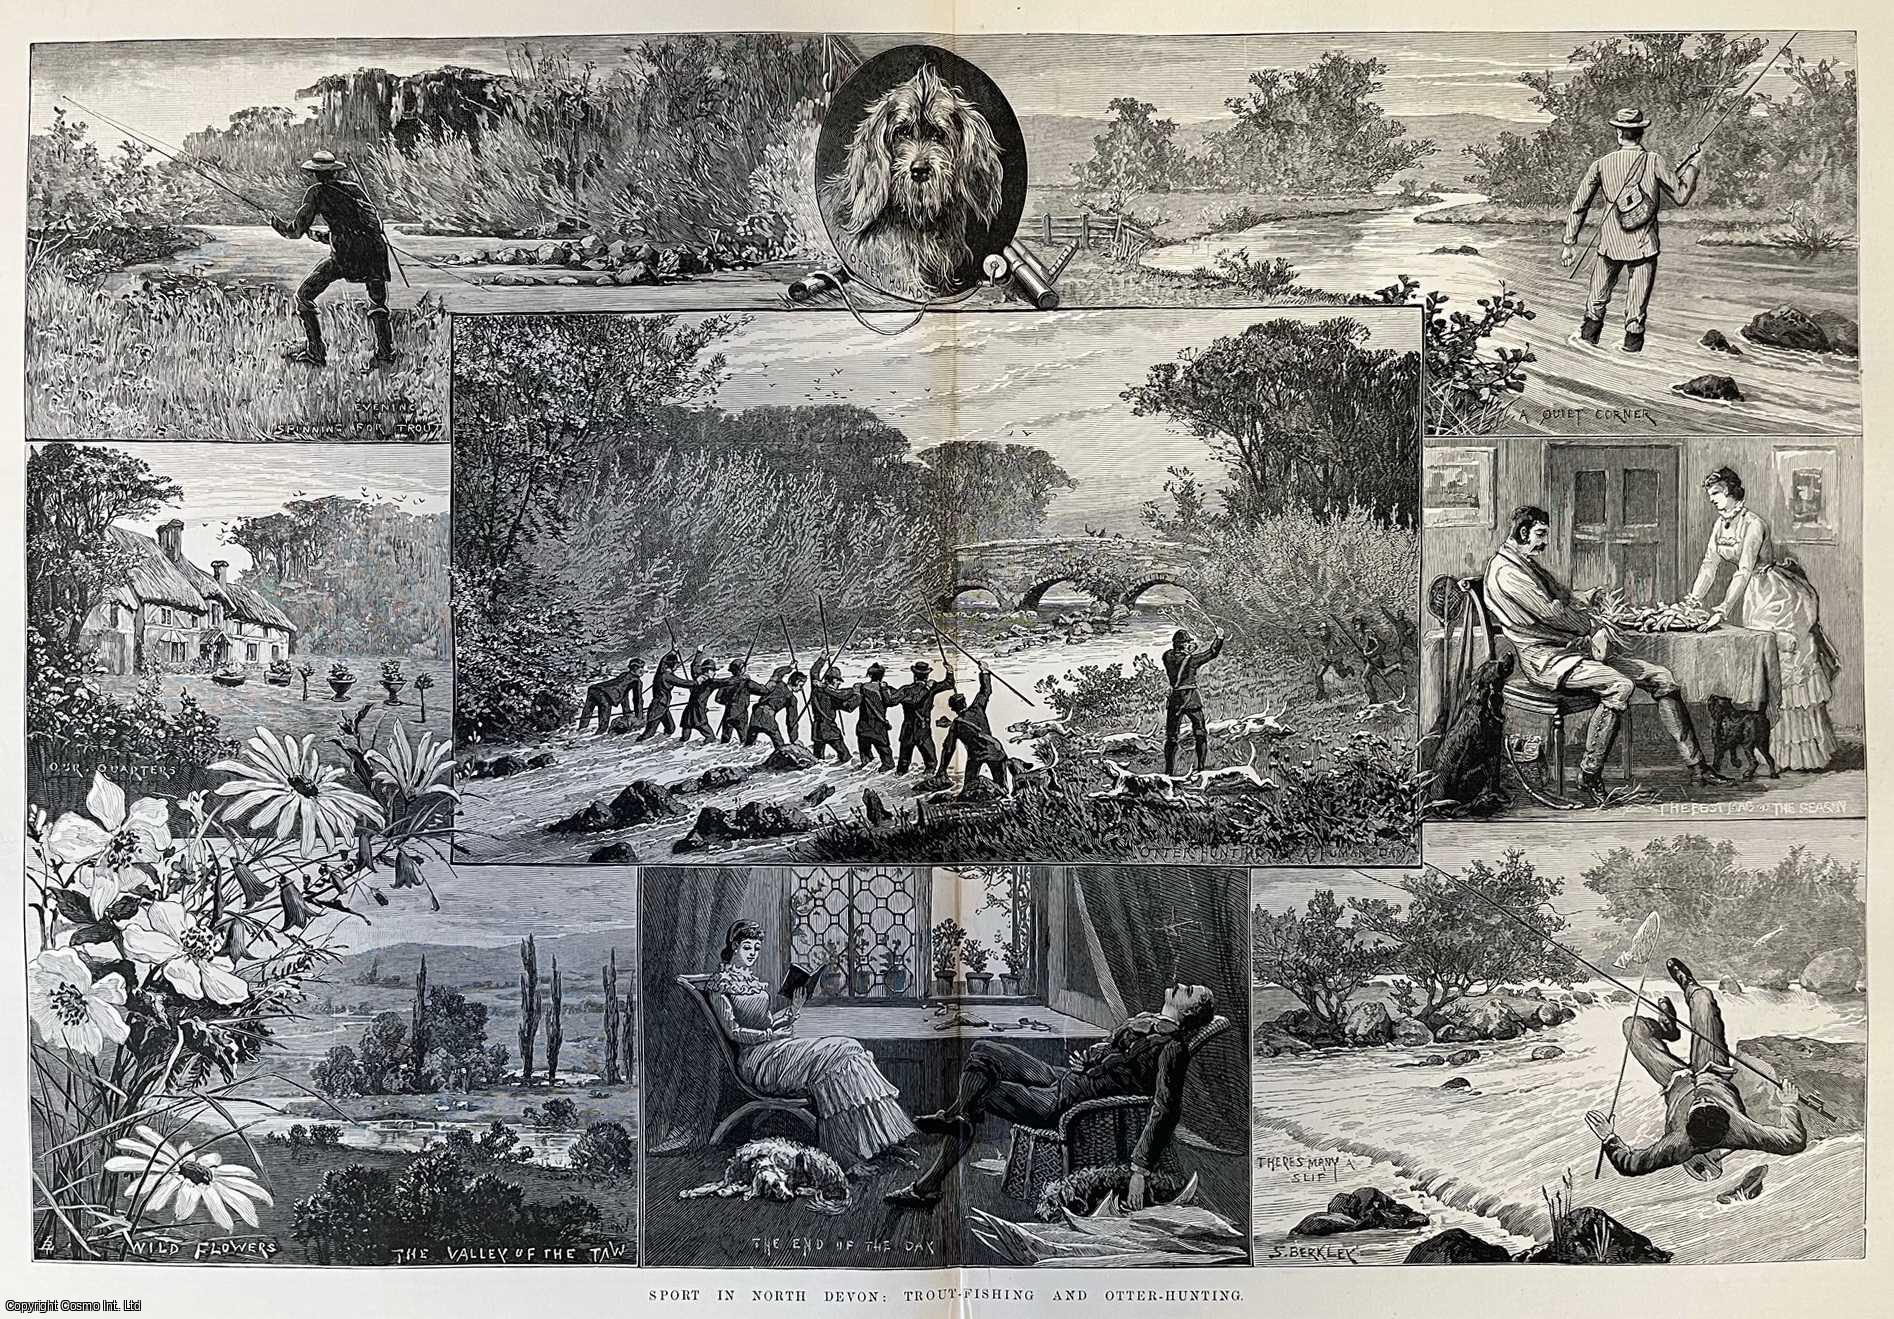 OTTER HUNTING - Sport in North Devon: Trout Fishing and Otter Hunting. A collection of original woodcut engravings, with accompanying text on a separate page, from the Illustrated London News, 1883.